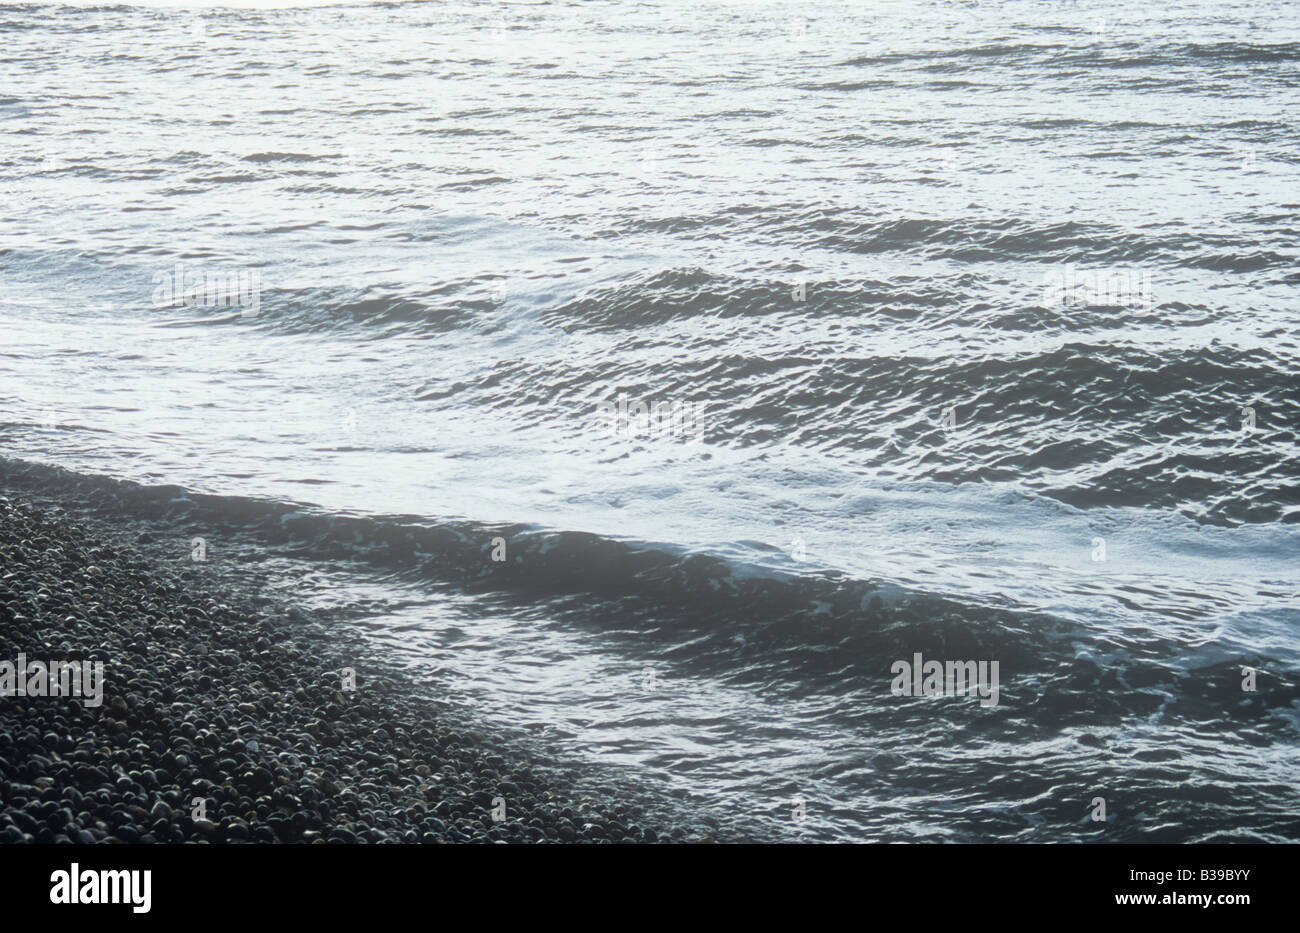 An uninviting silver grey sea with large swell breaking onto shore of smooth rounded gray pebbles Stock Photo